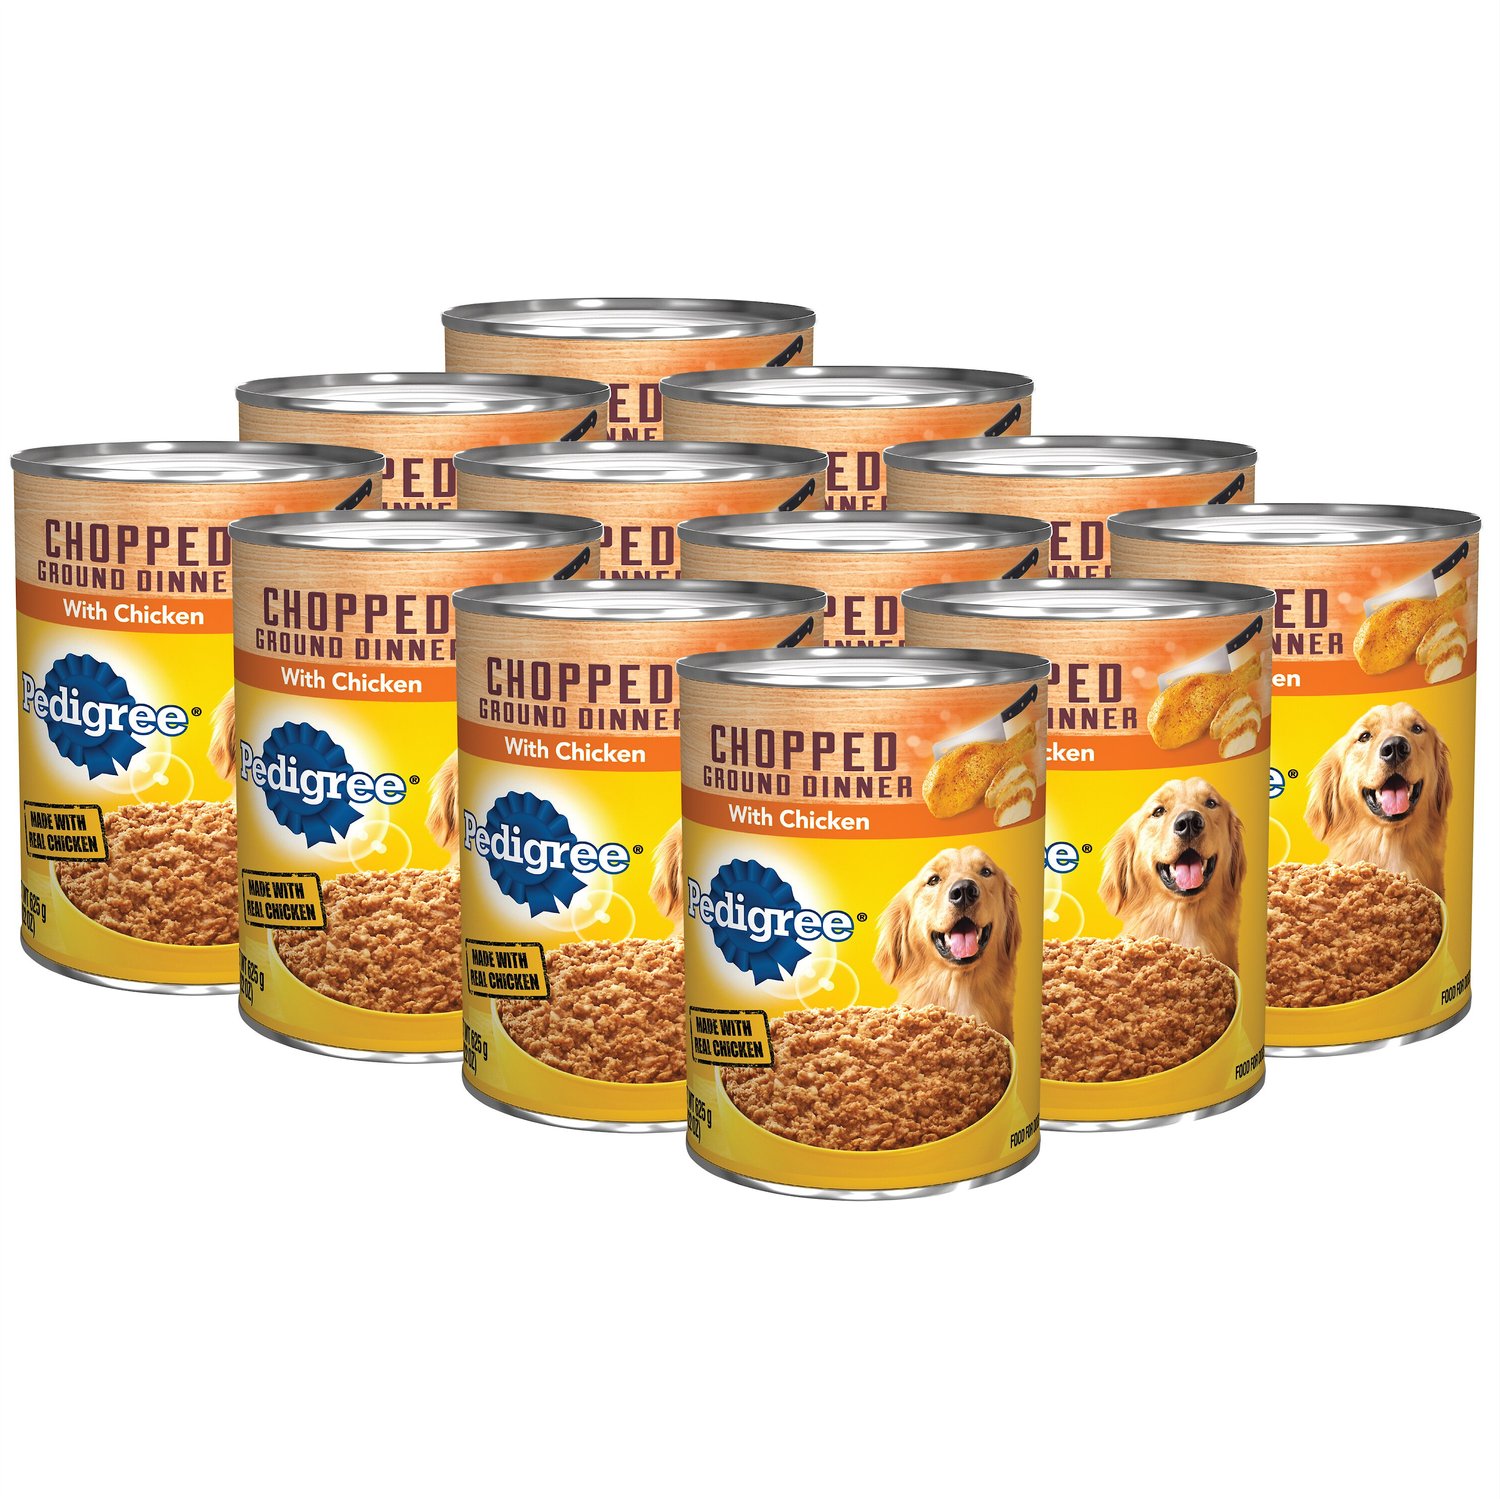 Pedigree Chopped Ground Dinner With Chicken Canned Dog